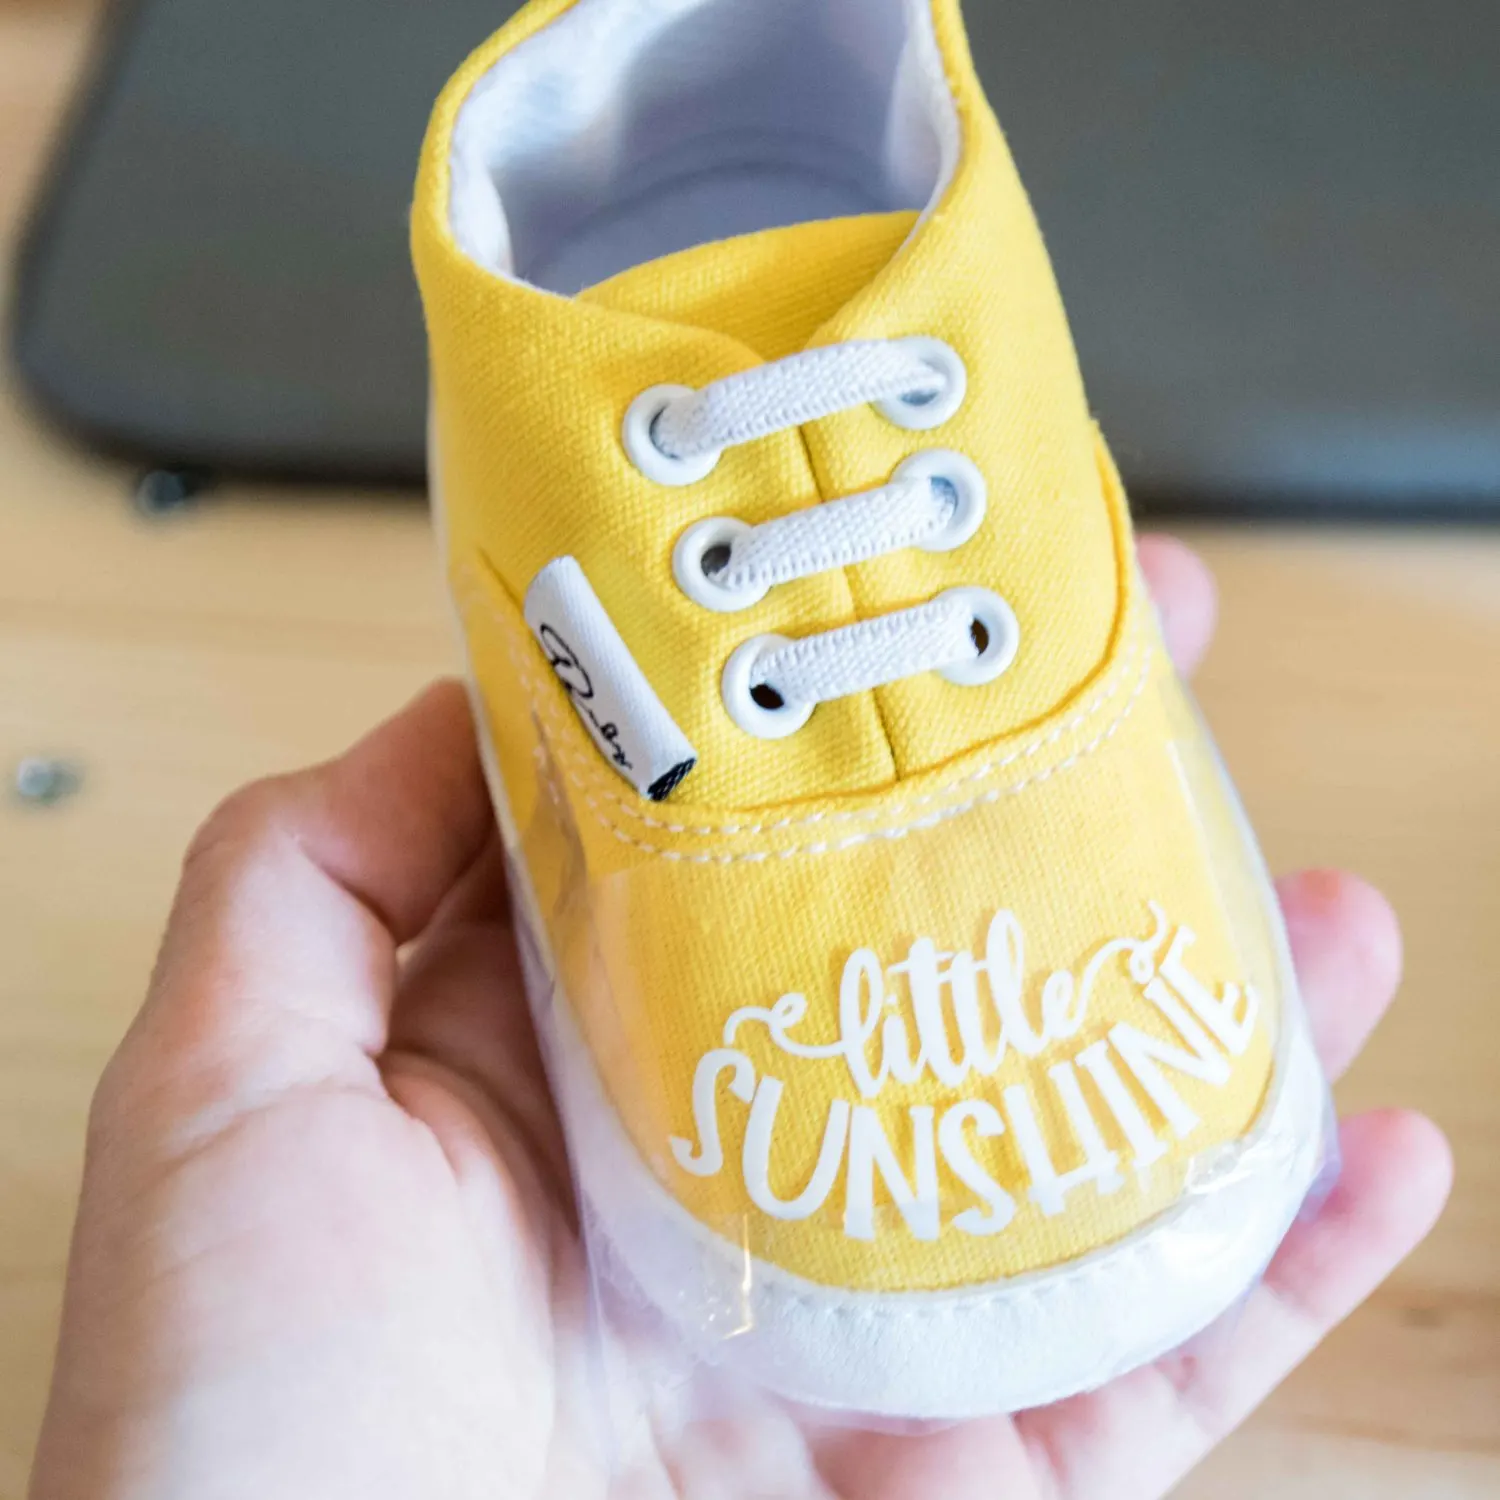 Taping design to baby shoe with heat transfer tape